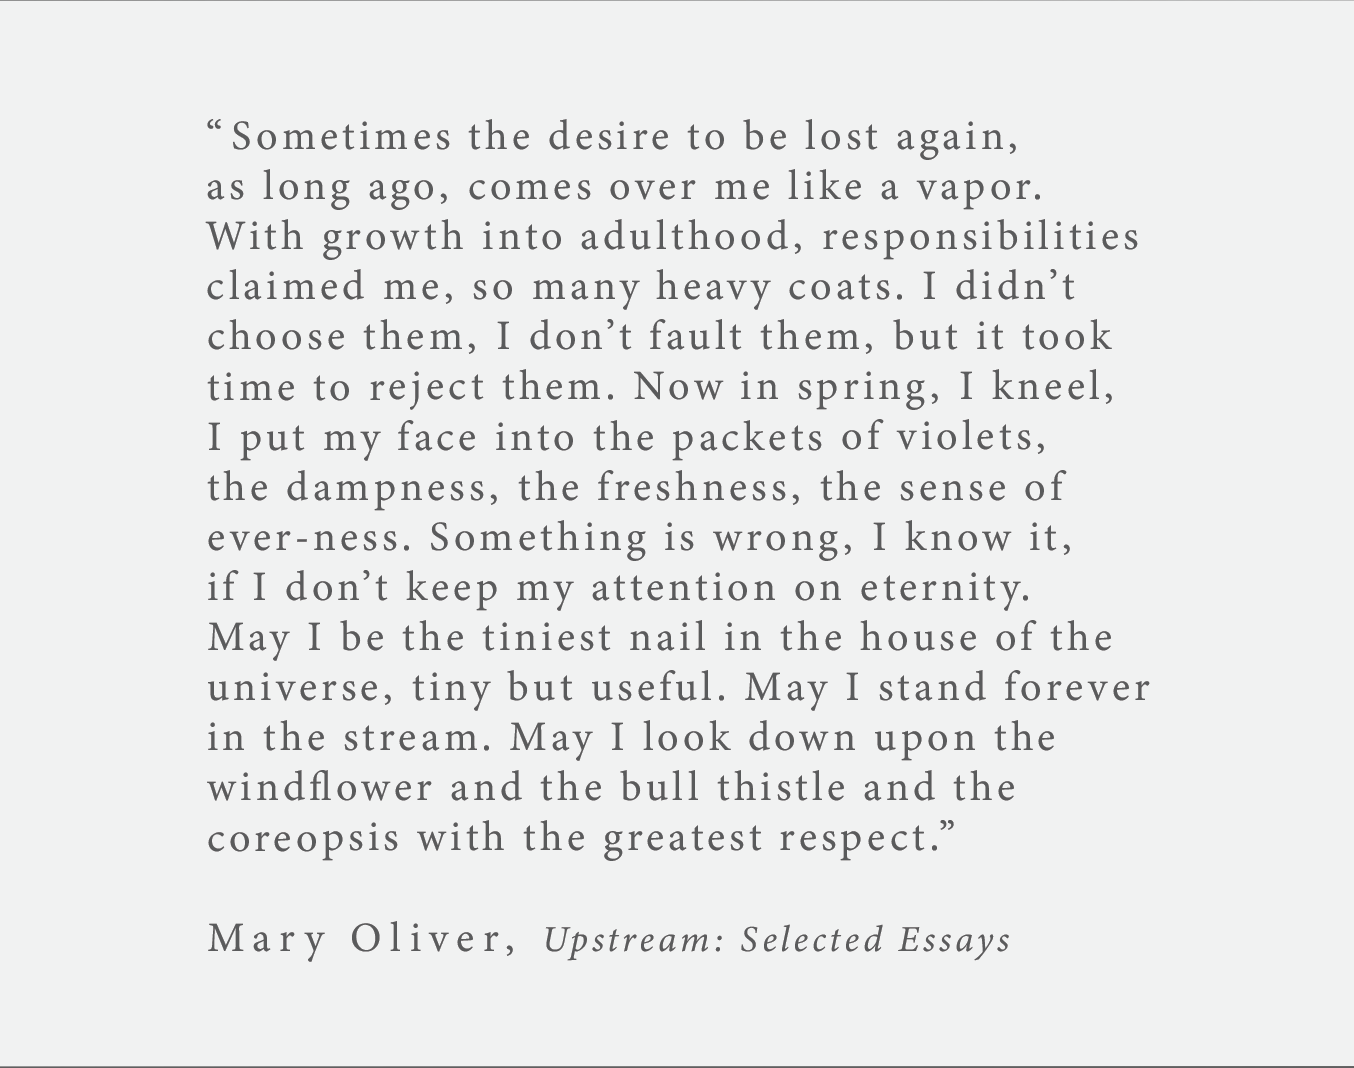 MaryOliver.Upstream.png